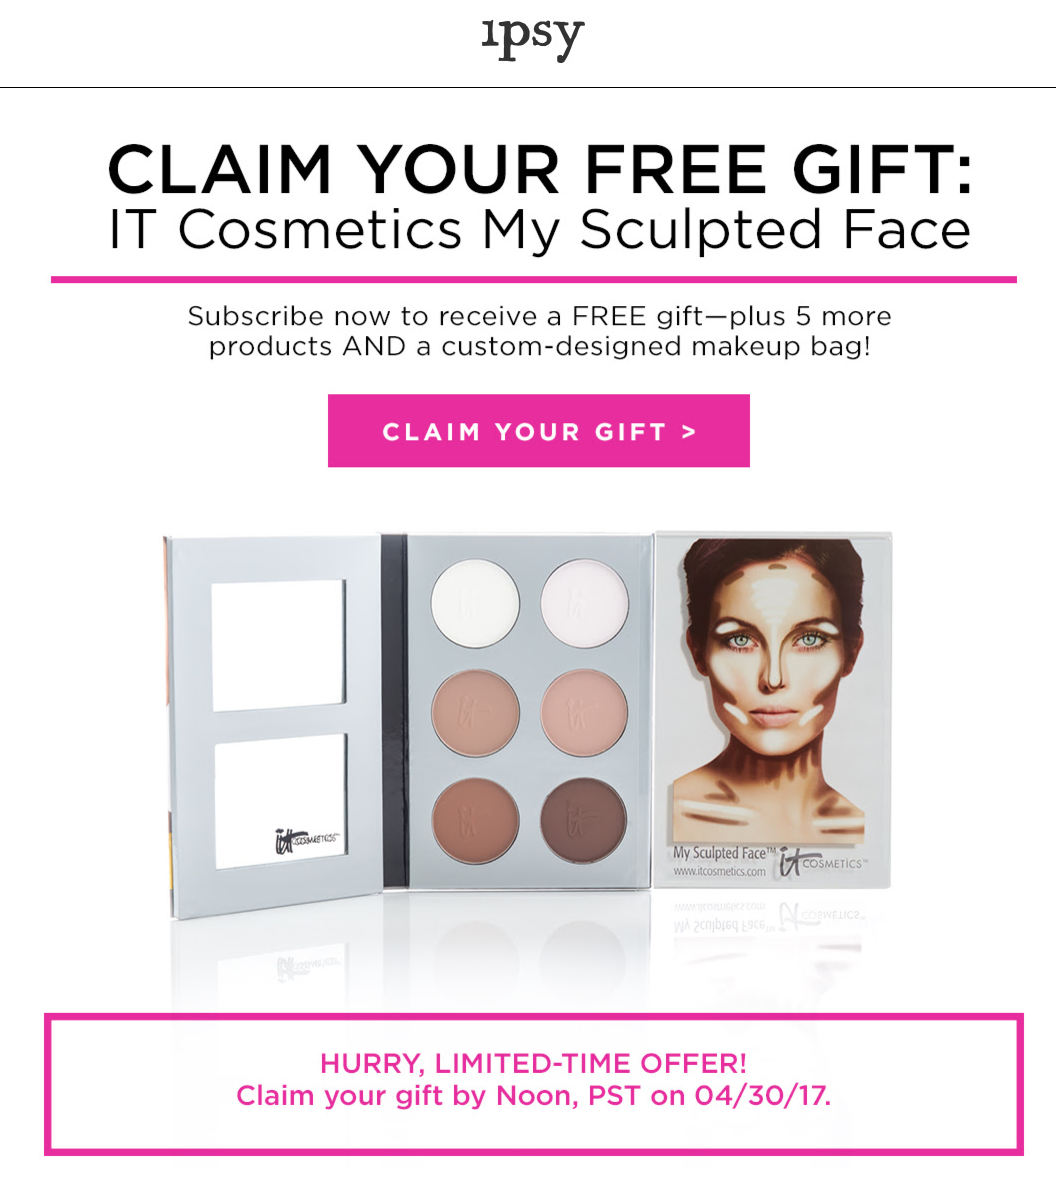 Ipsy Coupon – Free IT Cosmetics Contouring Palette!